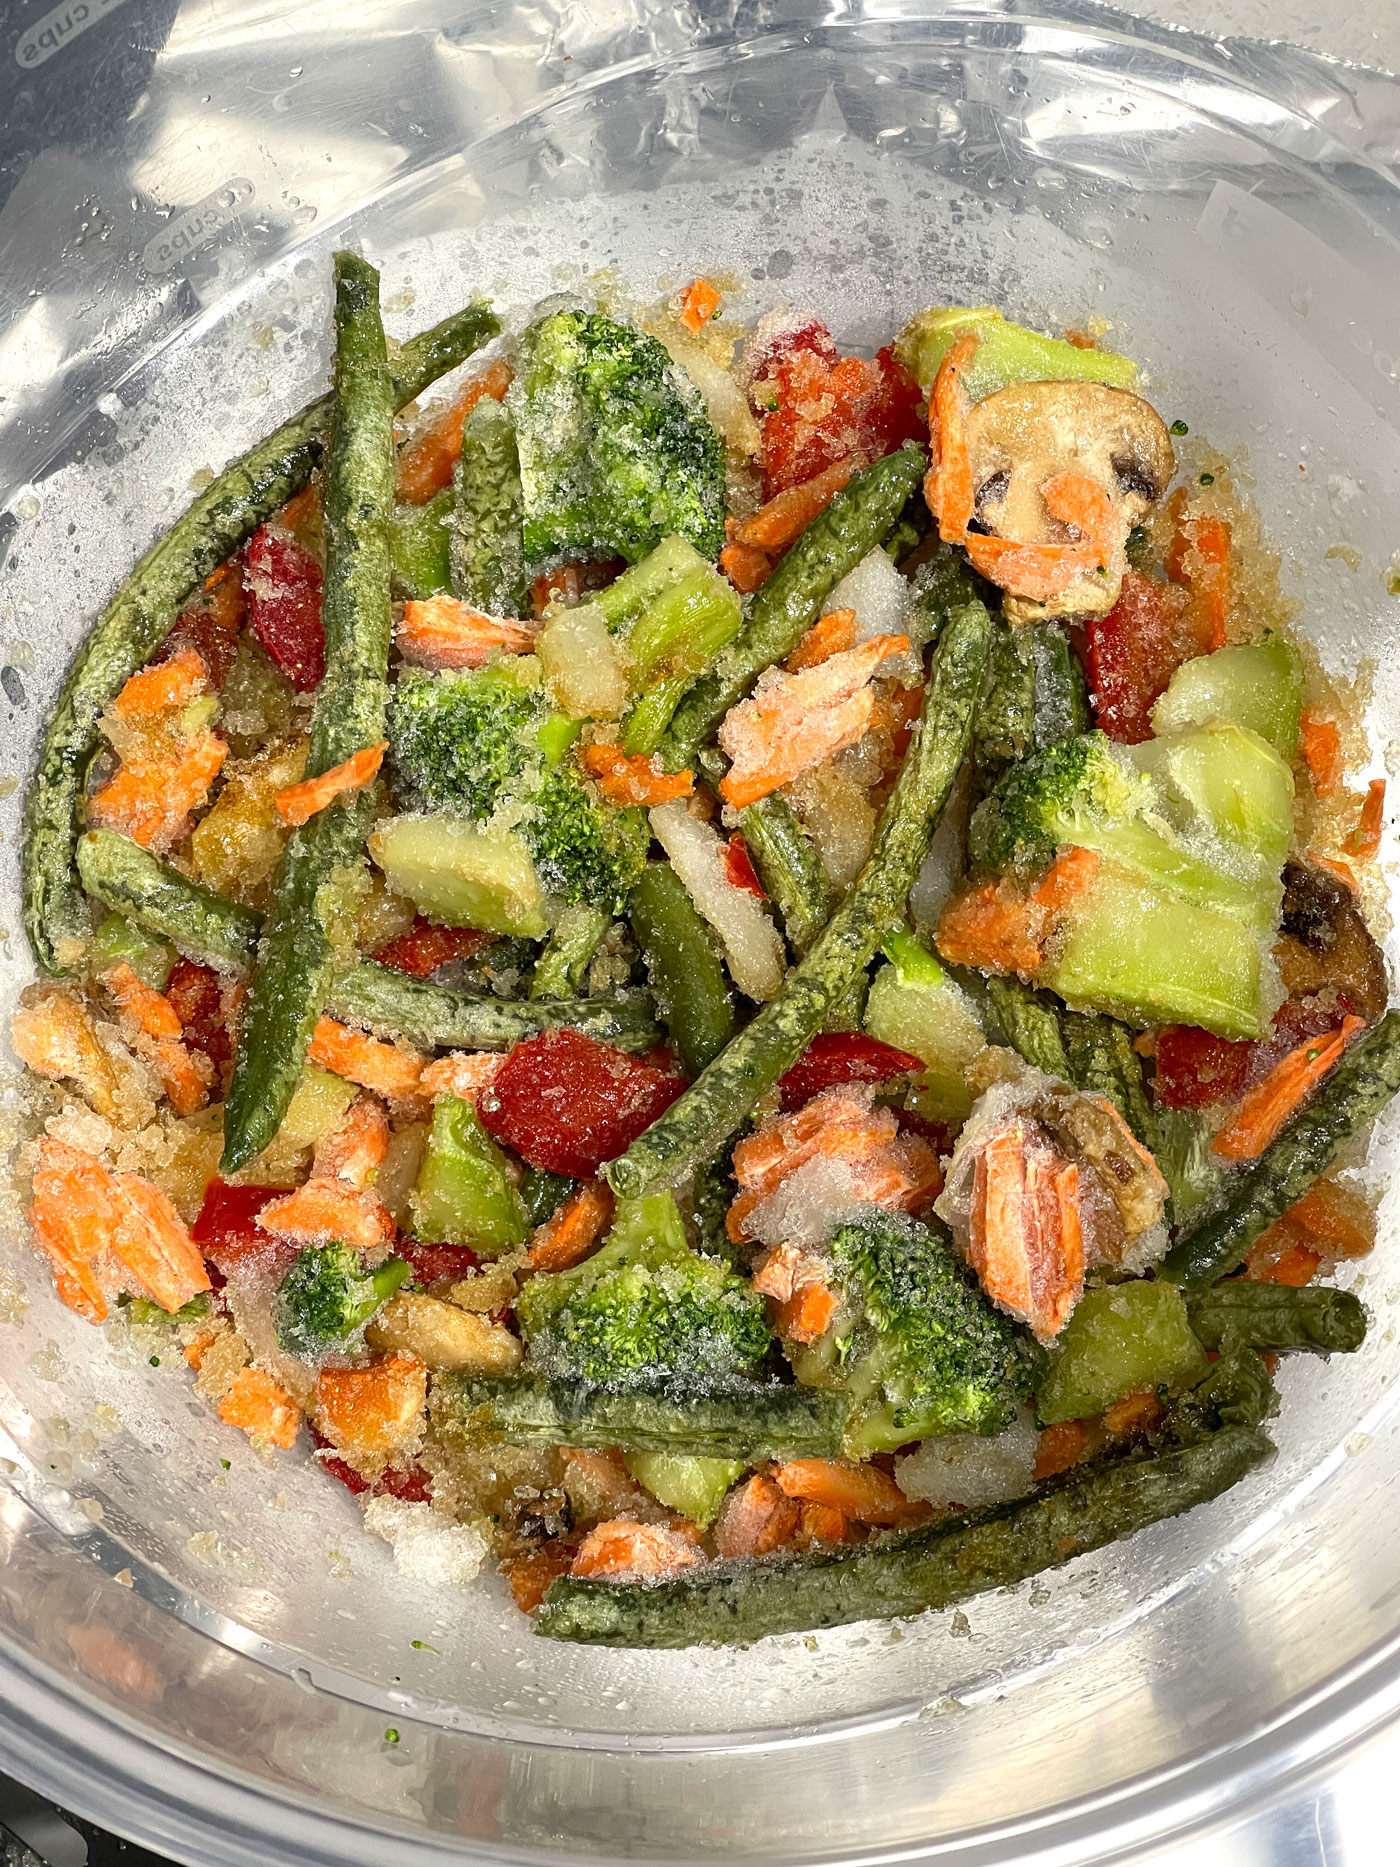 frozen stir fry vegetables mixed with seasoning